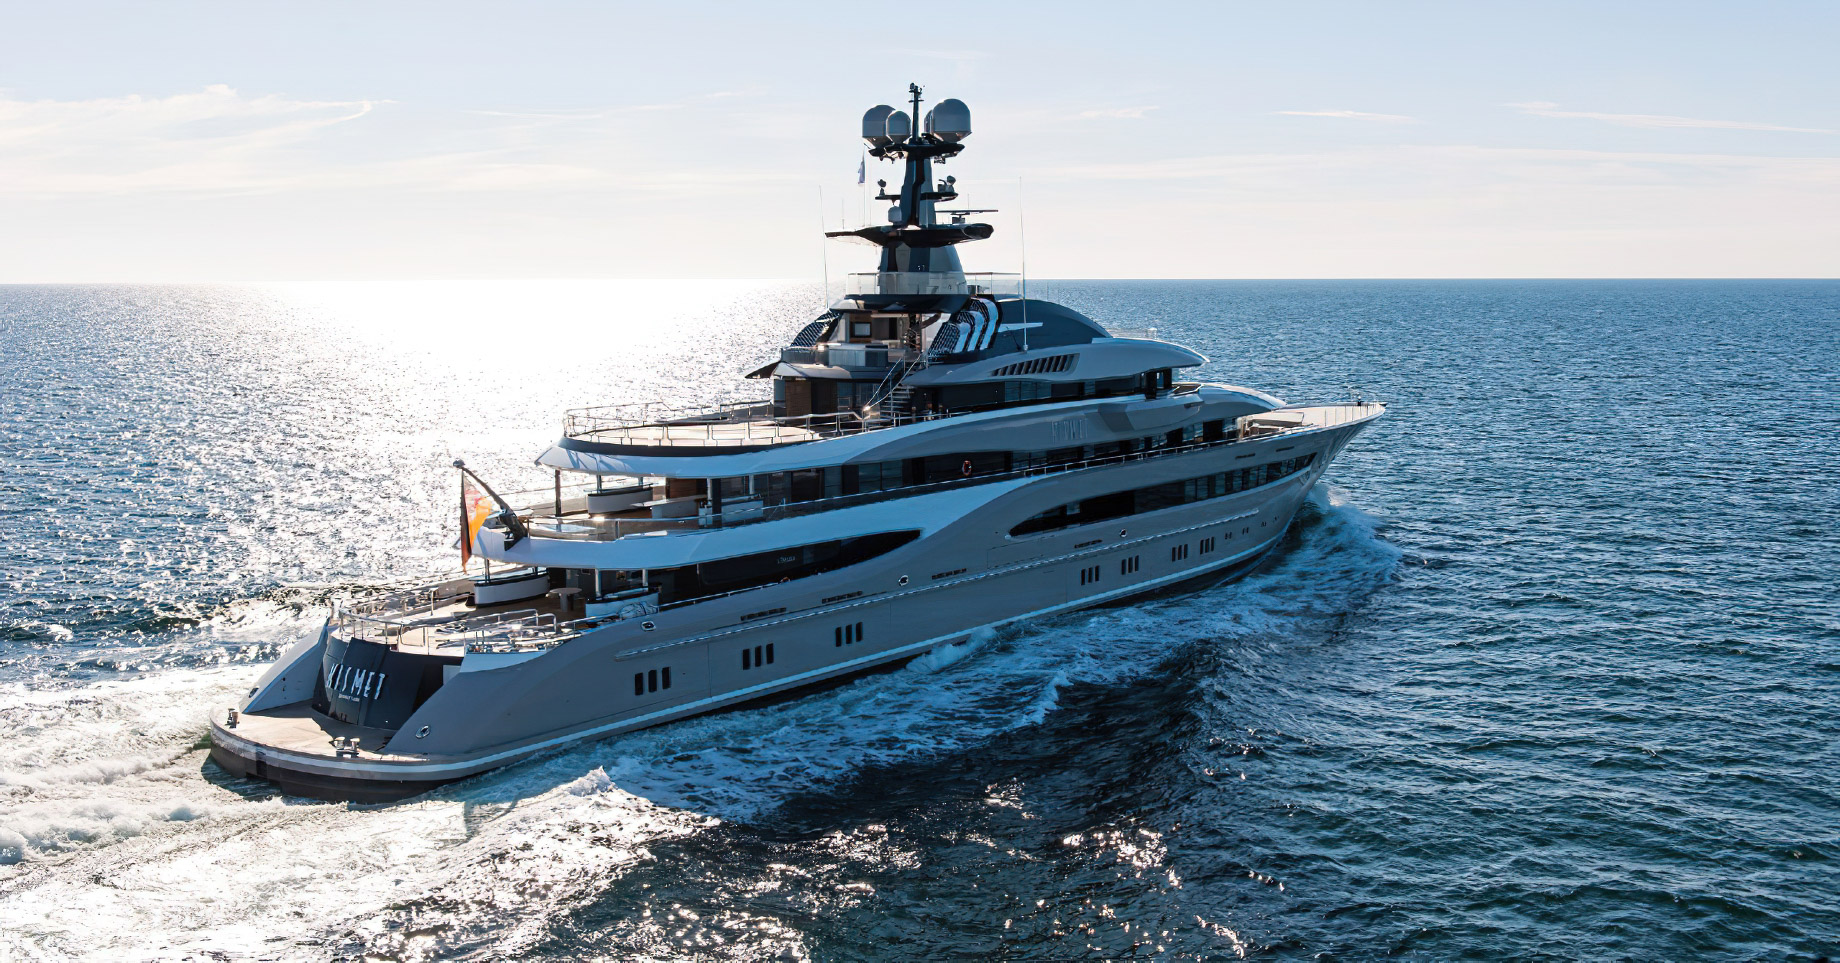 The Best Luxury Yachts For Sale By Amenity – Kismet Yacht